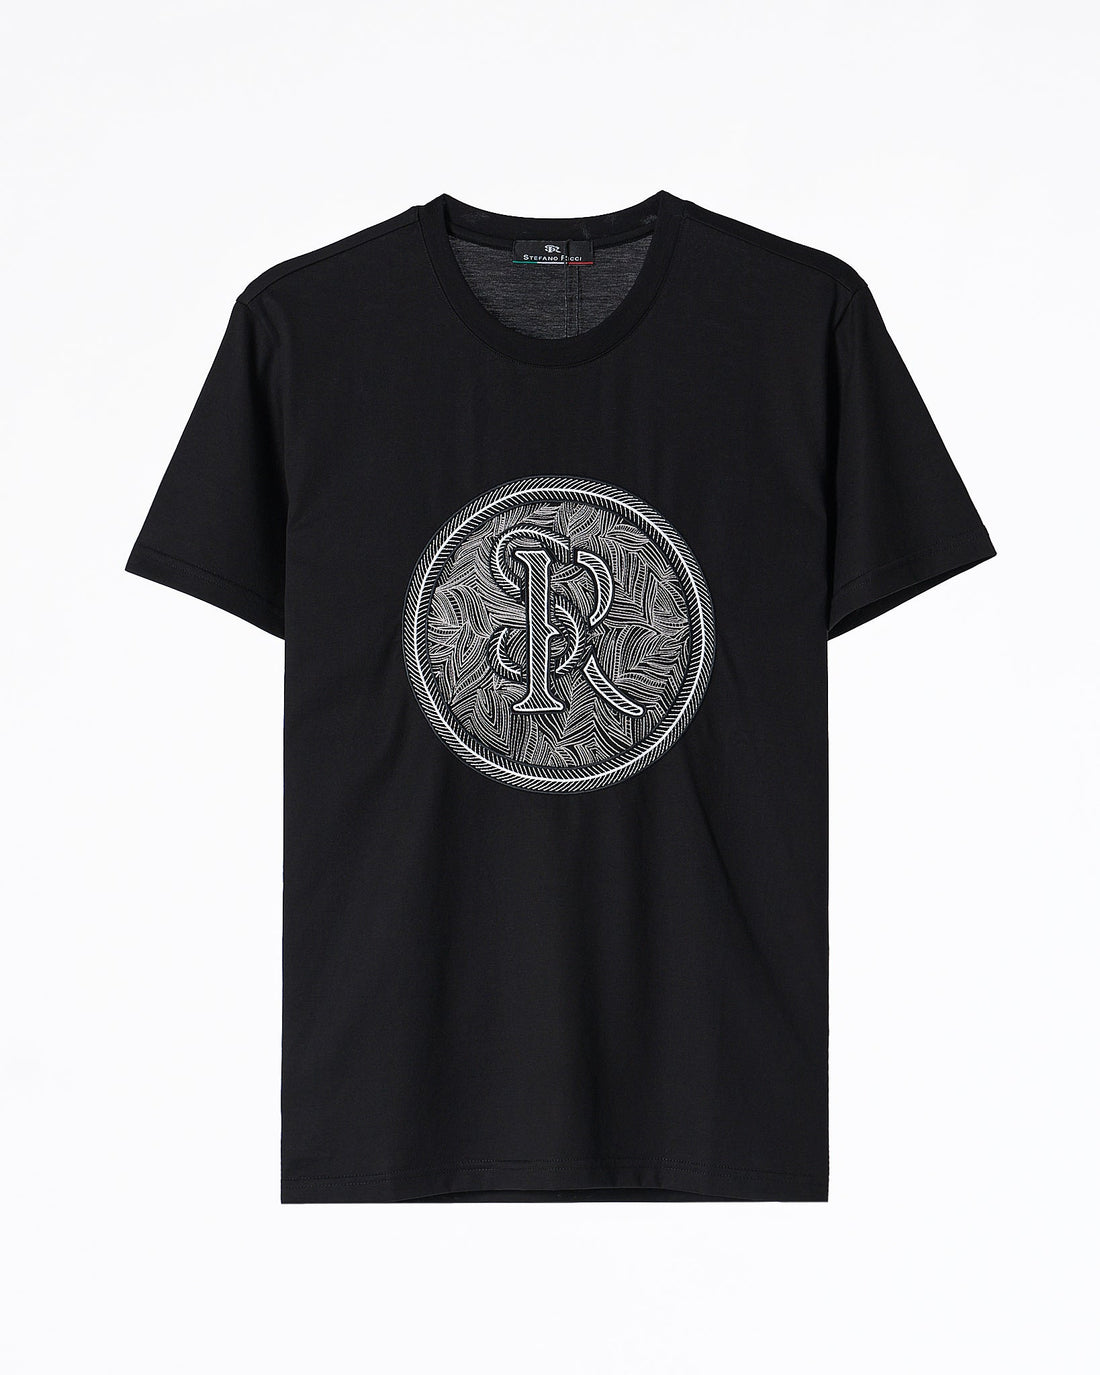 MOI OUTFIT-SR Logo Embroidered Men T-Shirt 64.90